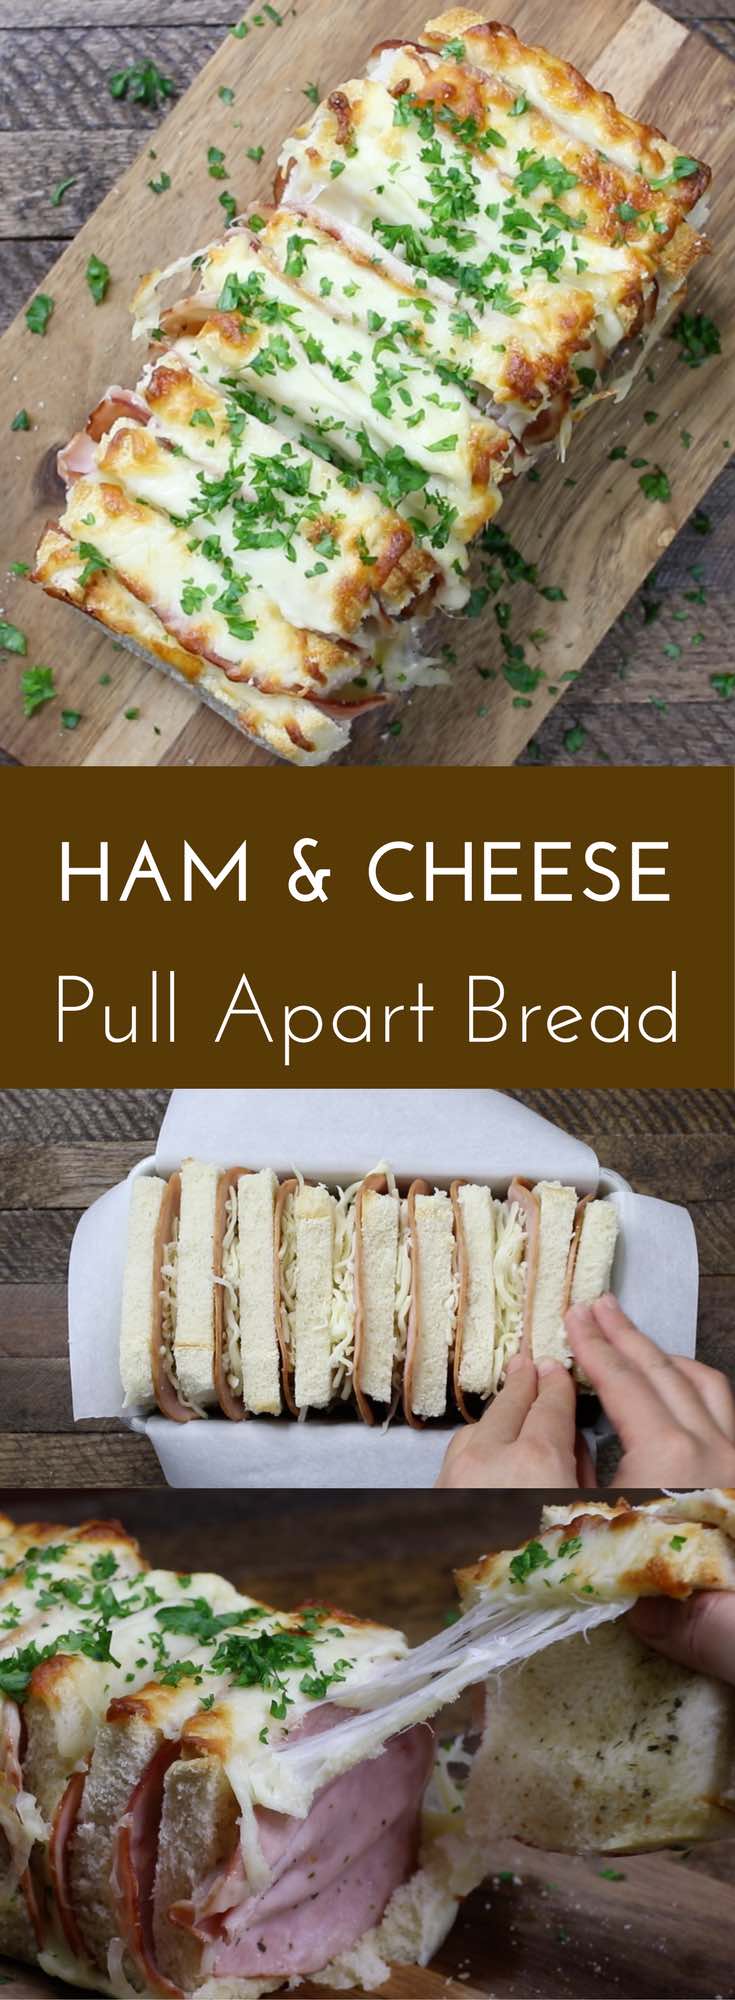 Ham and Cheese Loaf is similar to crack bread or a croque monsieur, but better! Layers of bread, ham and cheese baked in the oven to golden perfection. A great lunch idea for a crowd!